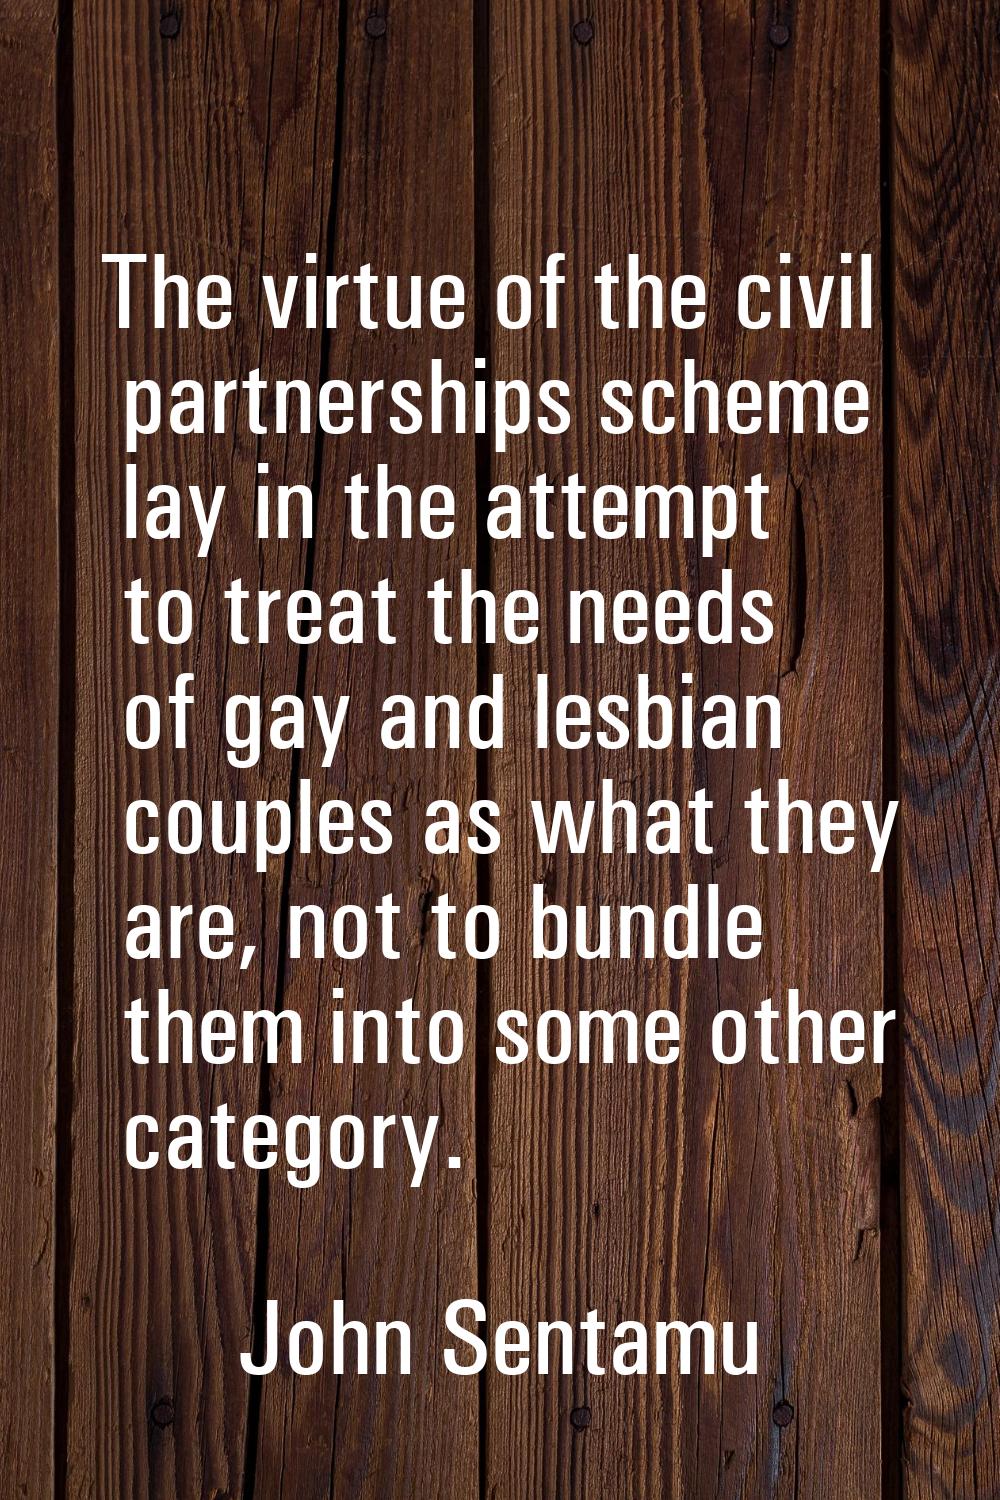 The virtue of the civil partnerships scheme lay in the attempt to treat the needs of gay and lesbia